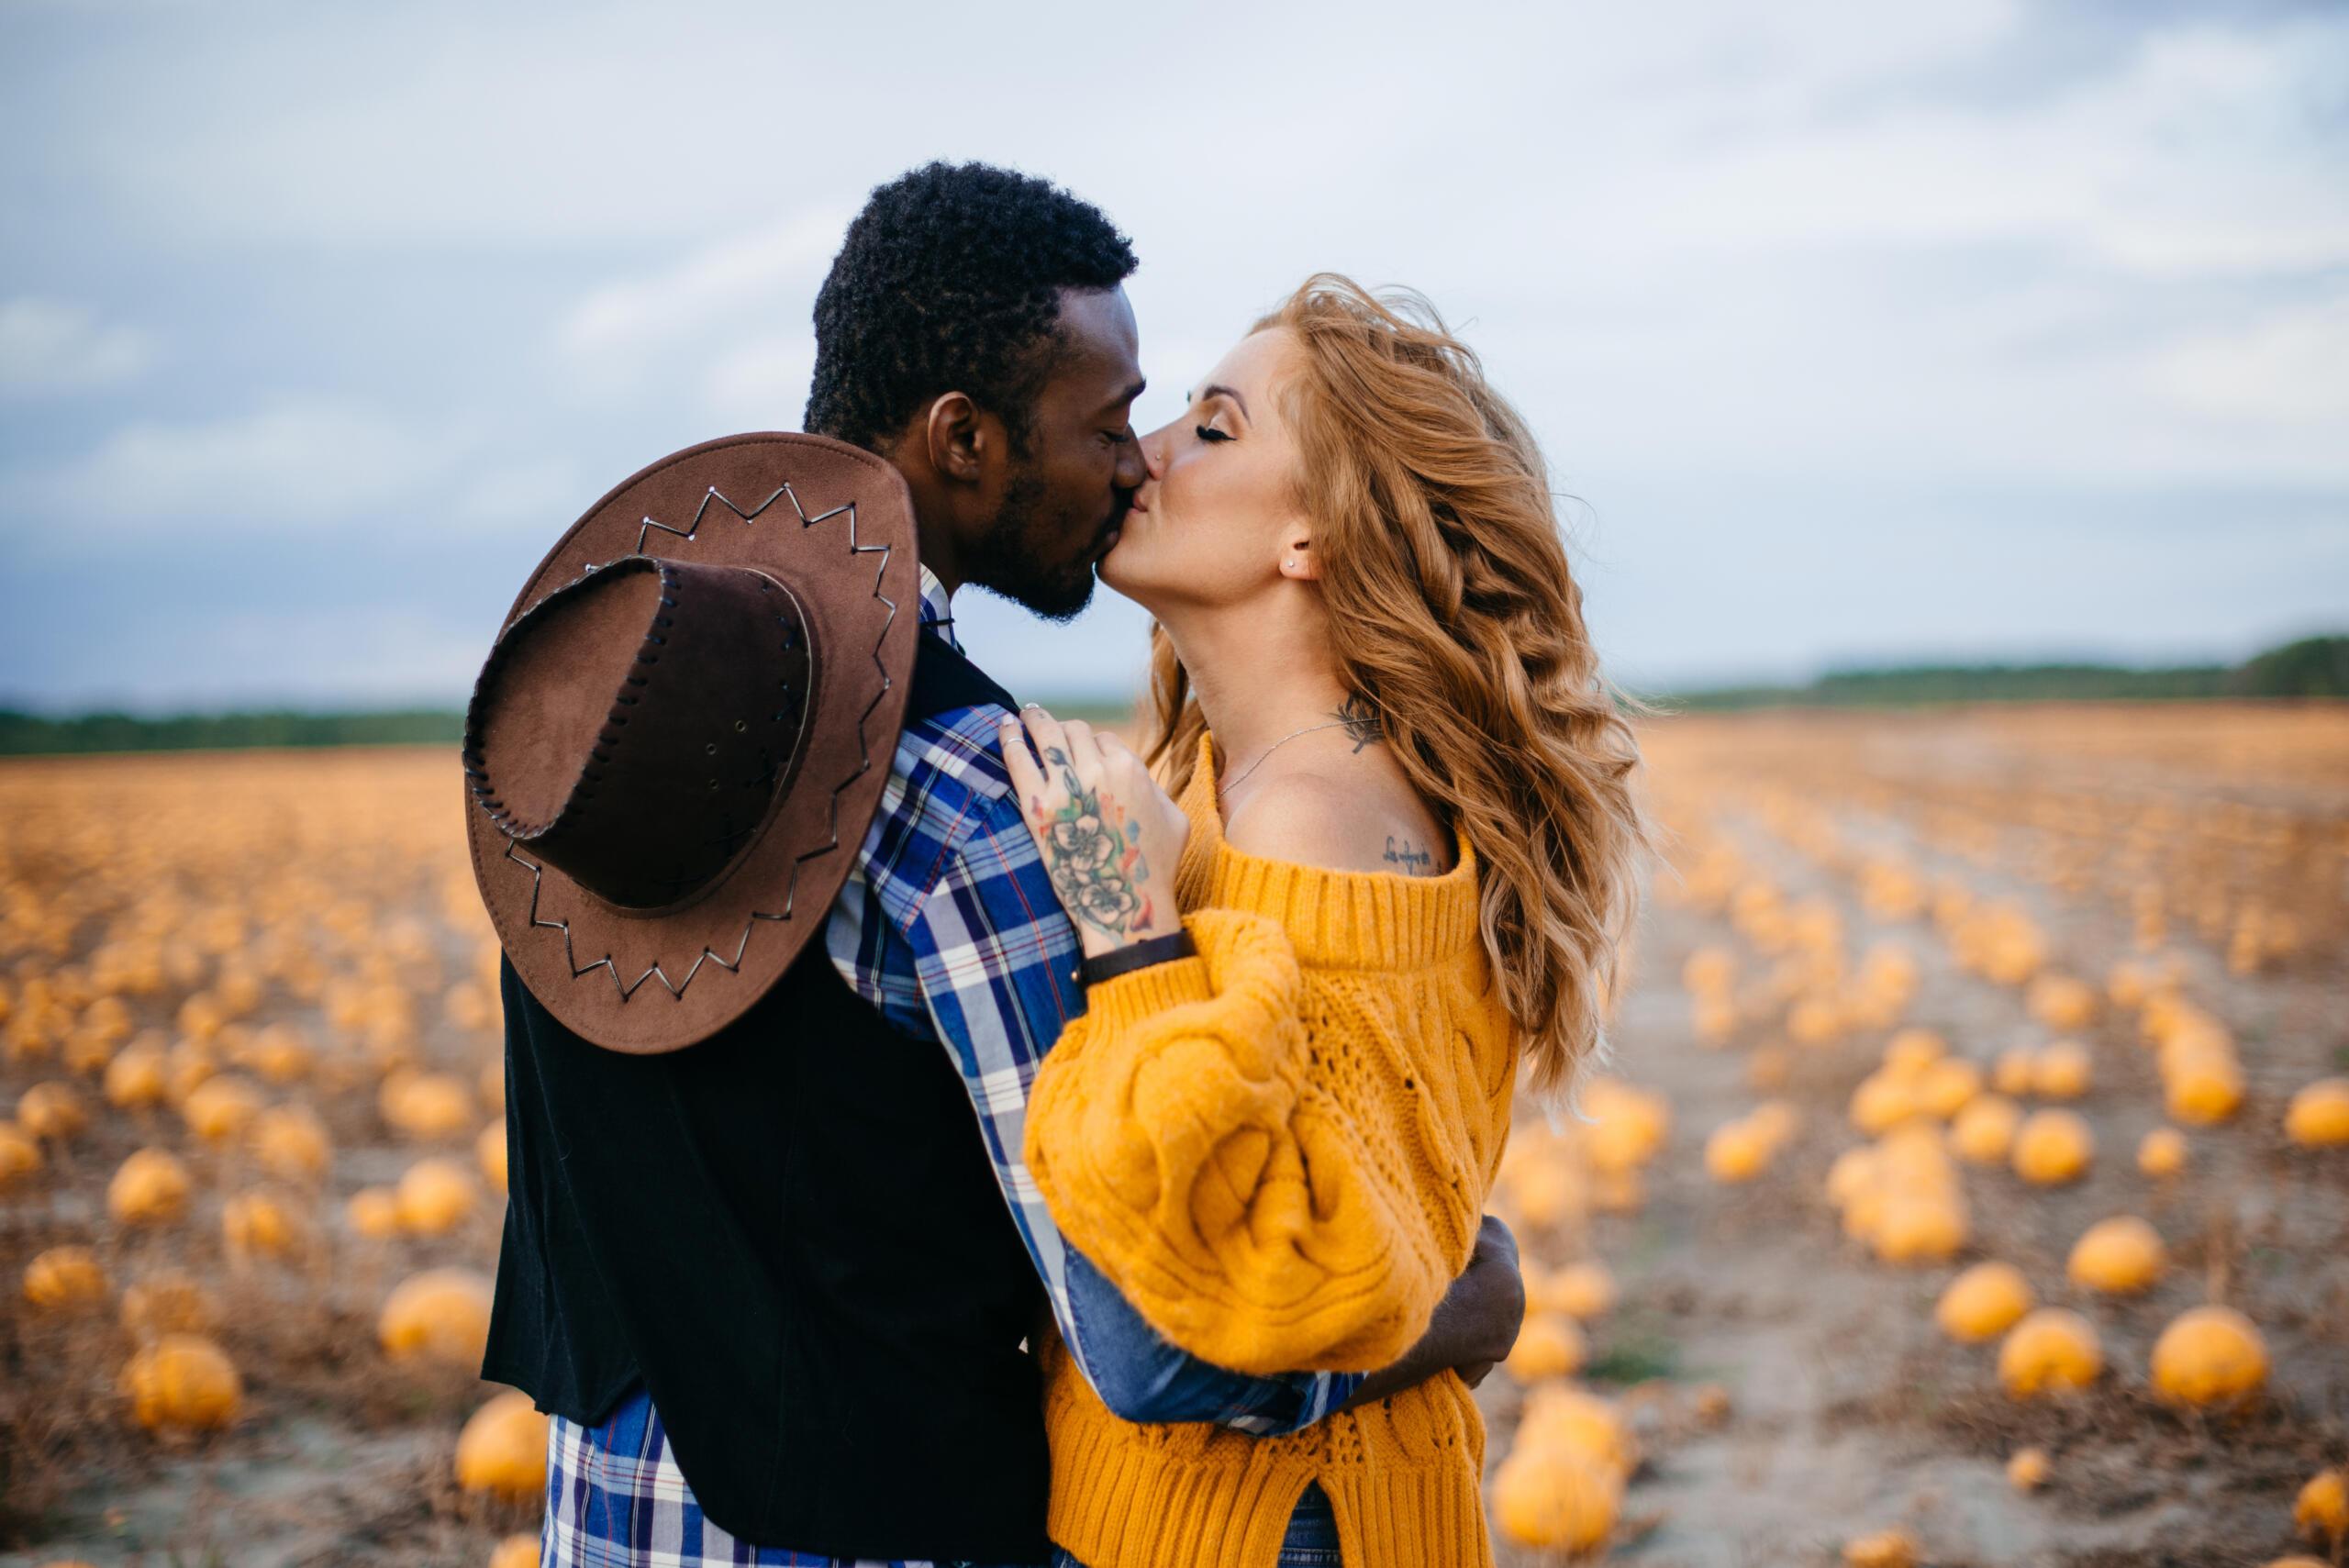 Halloween Date Ideas That Are Perfect for Spooky Season